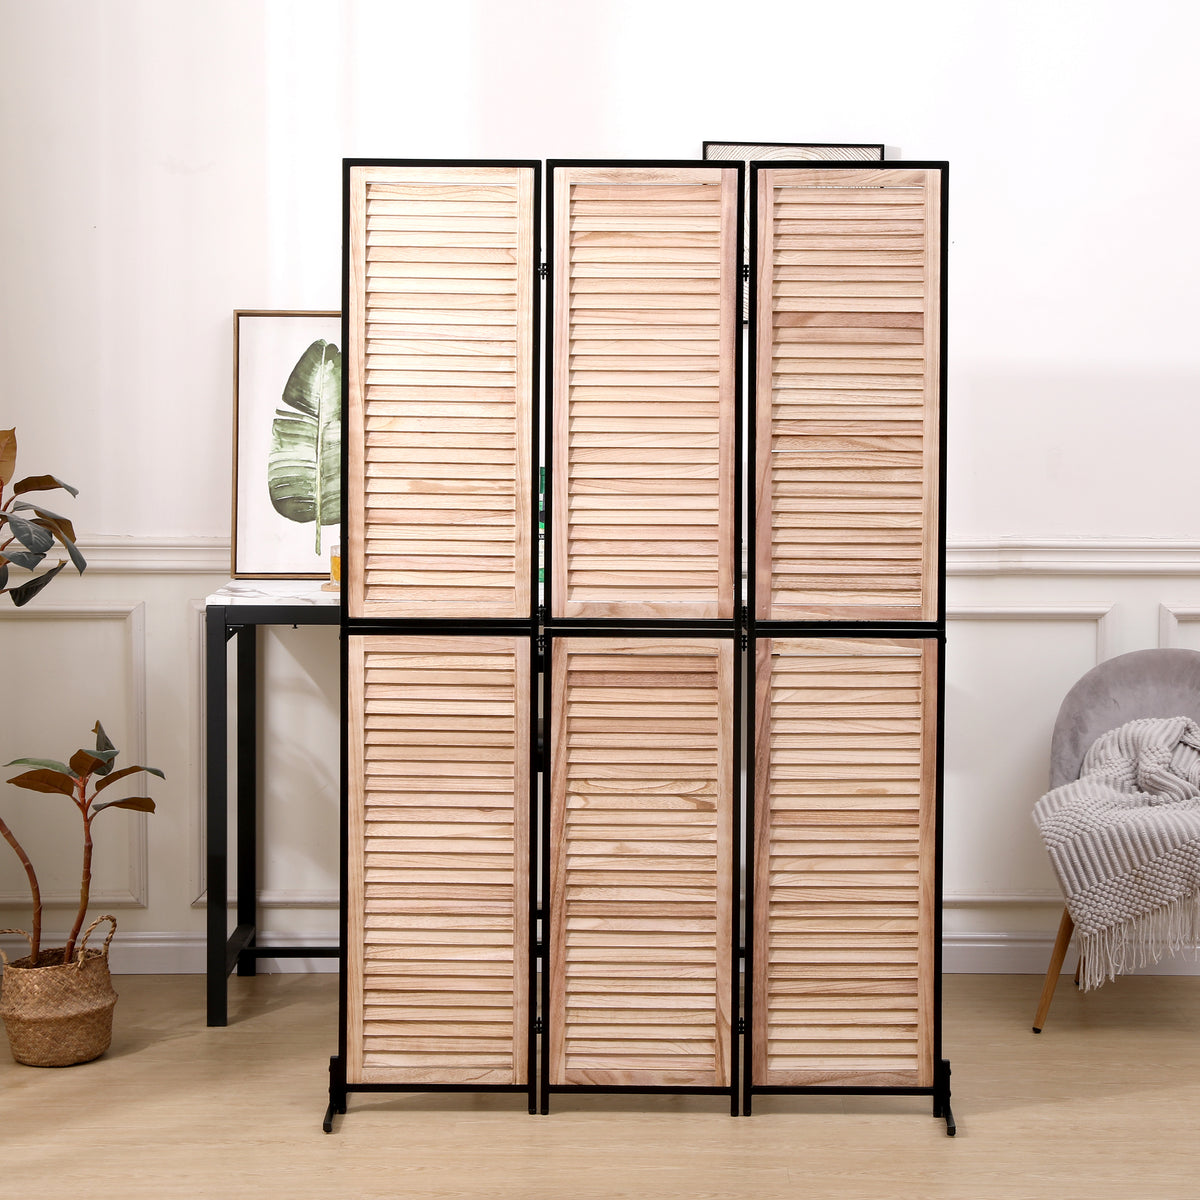 3 Panel Room Dividers and Folding Privacy Screen Natural Wooden Room Partitions 6ft - Natural